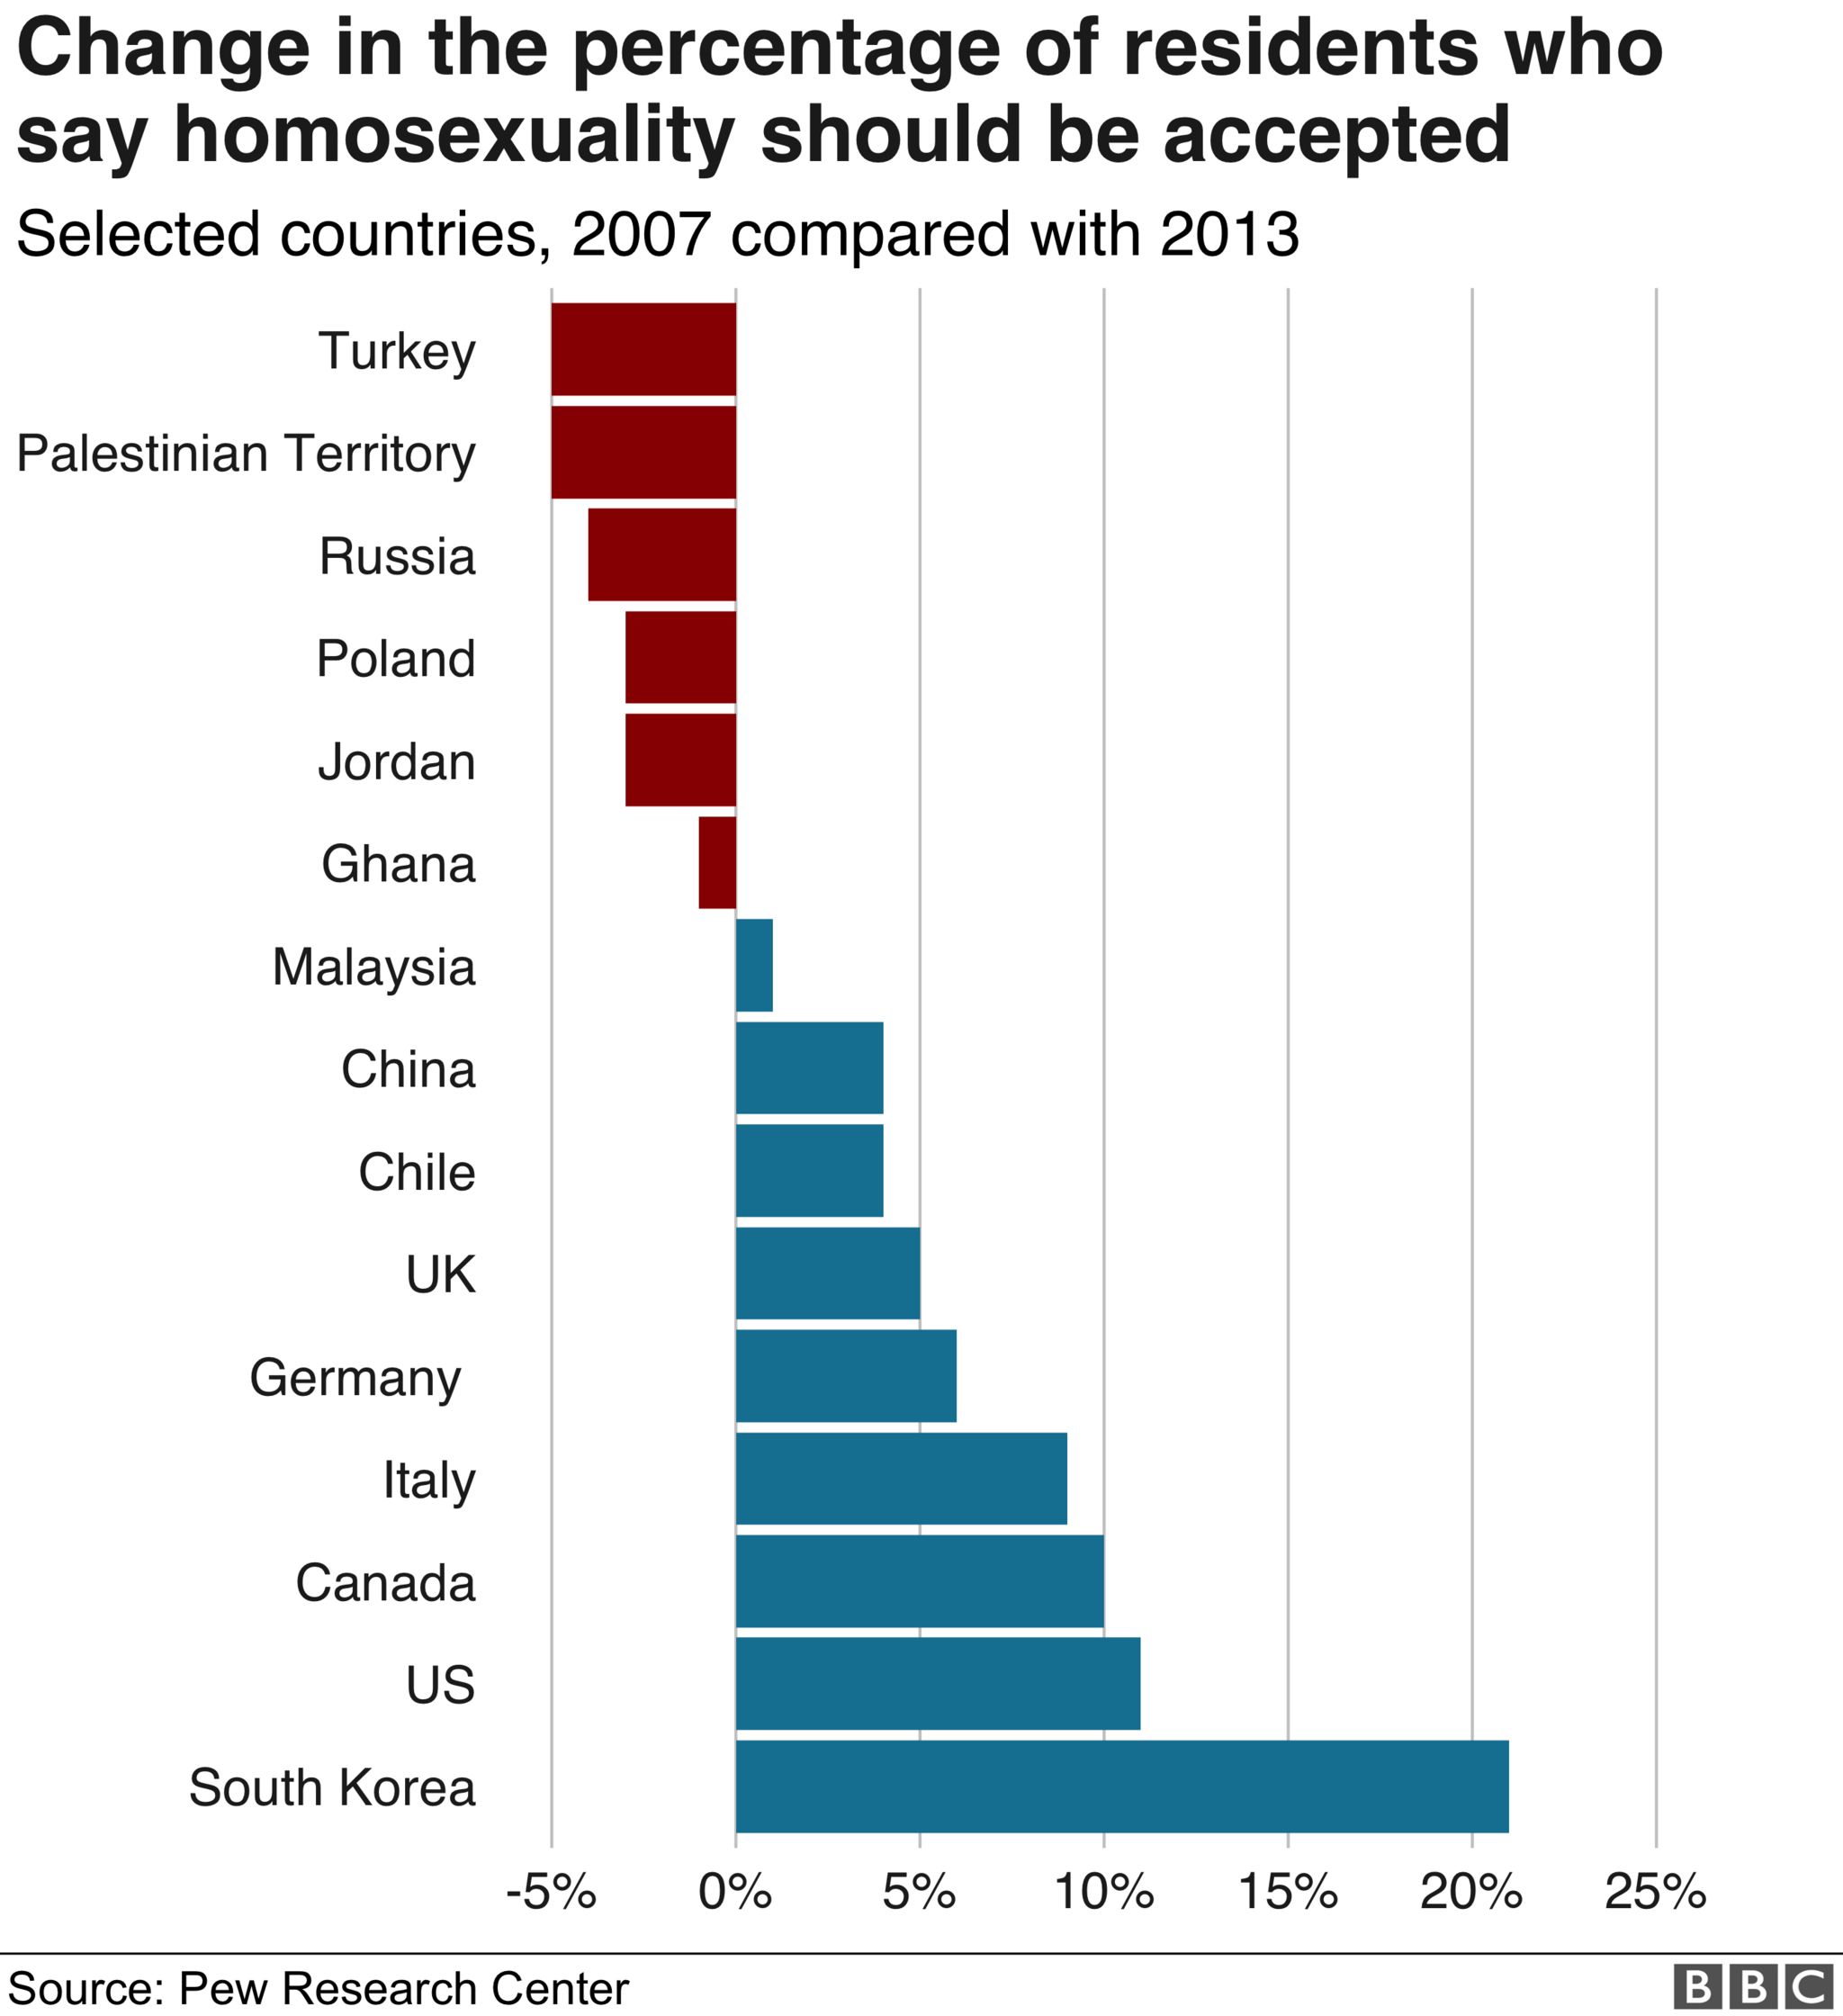 Chart showing change in proportion of residents who say homosexuality should be accepted